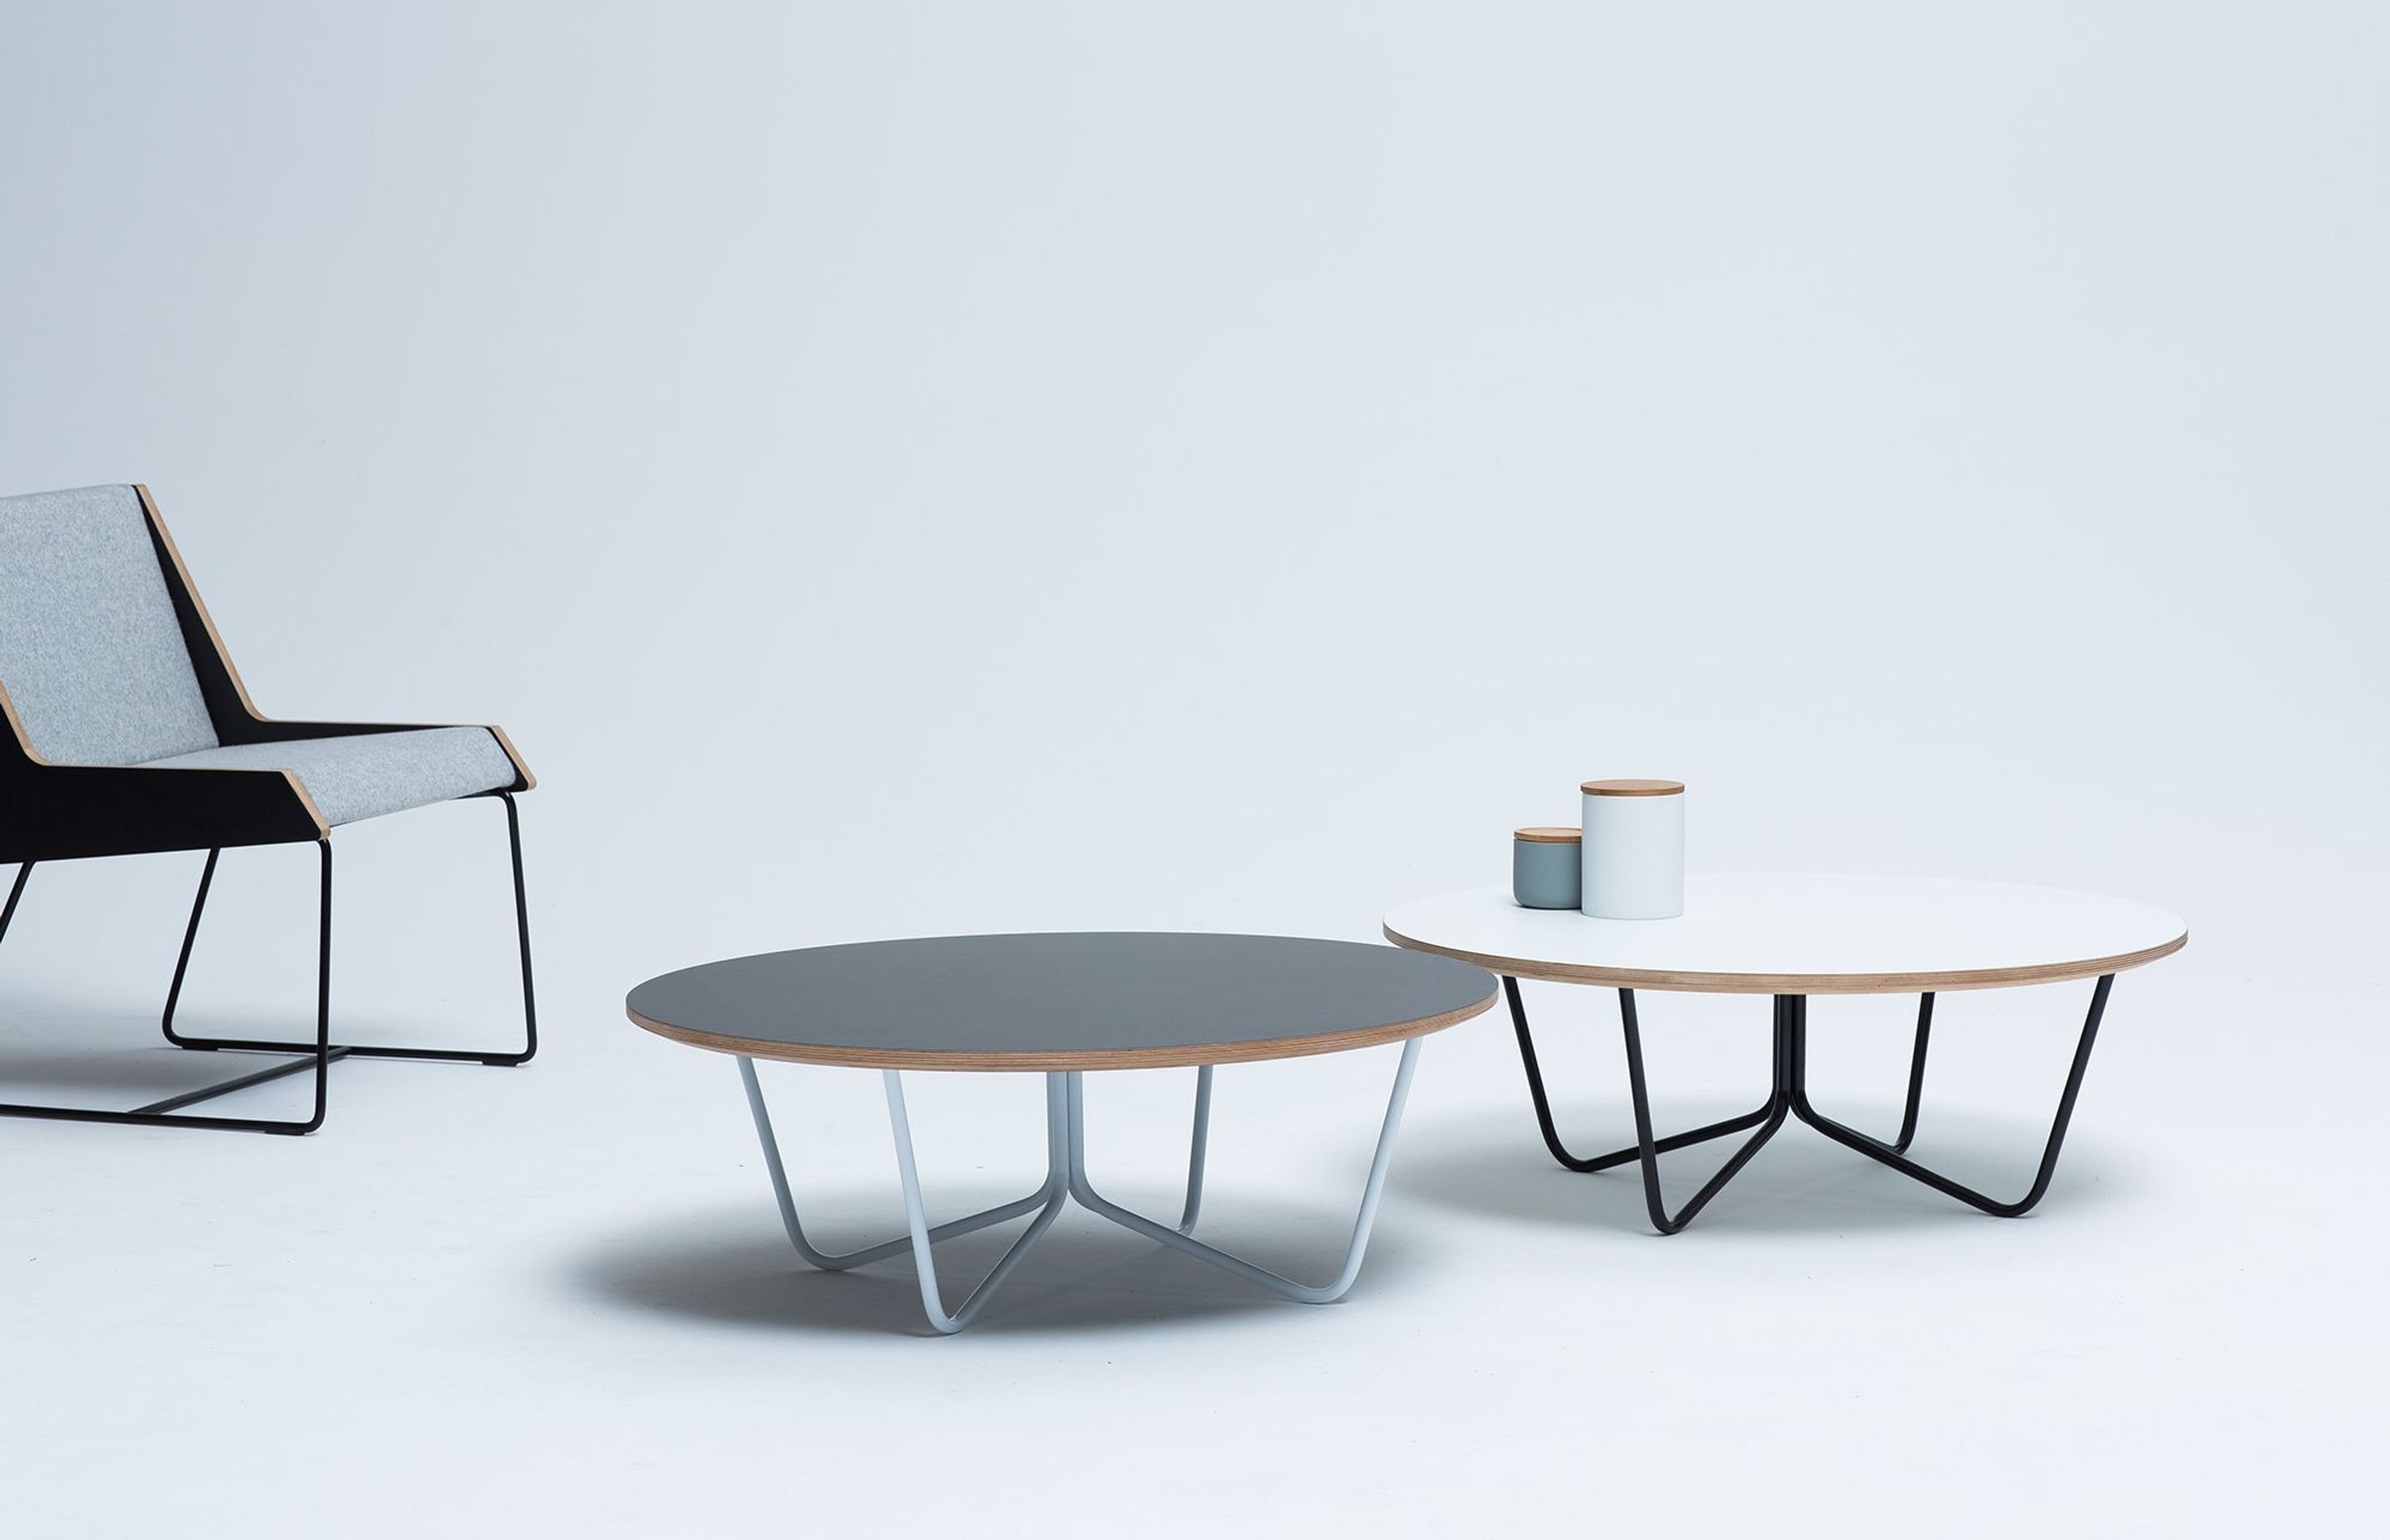 North Coffee Table and Jet Chair